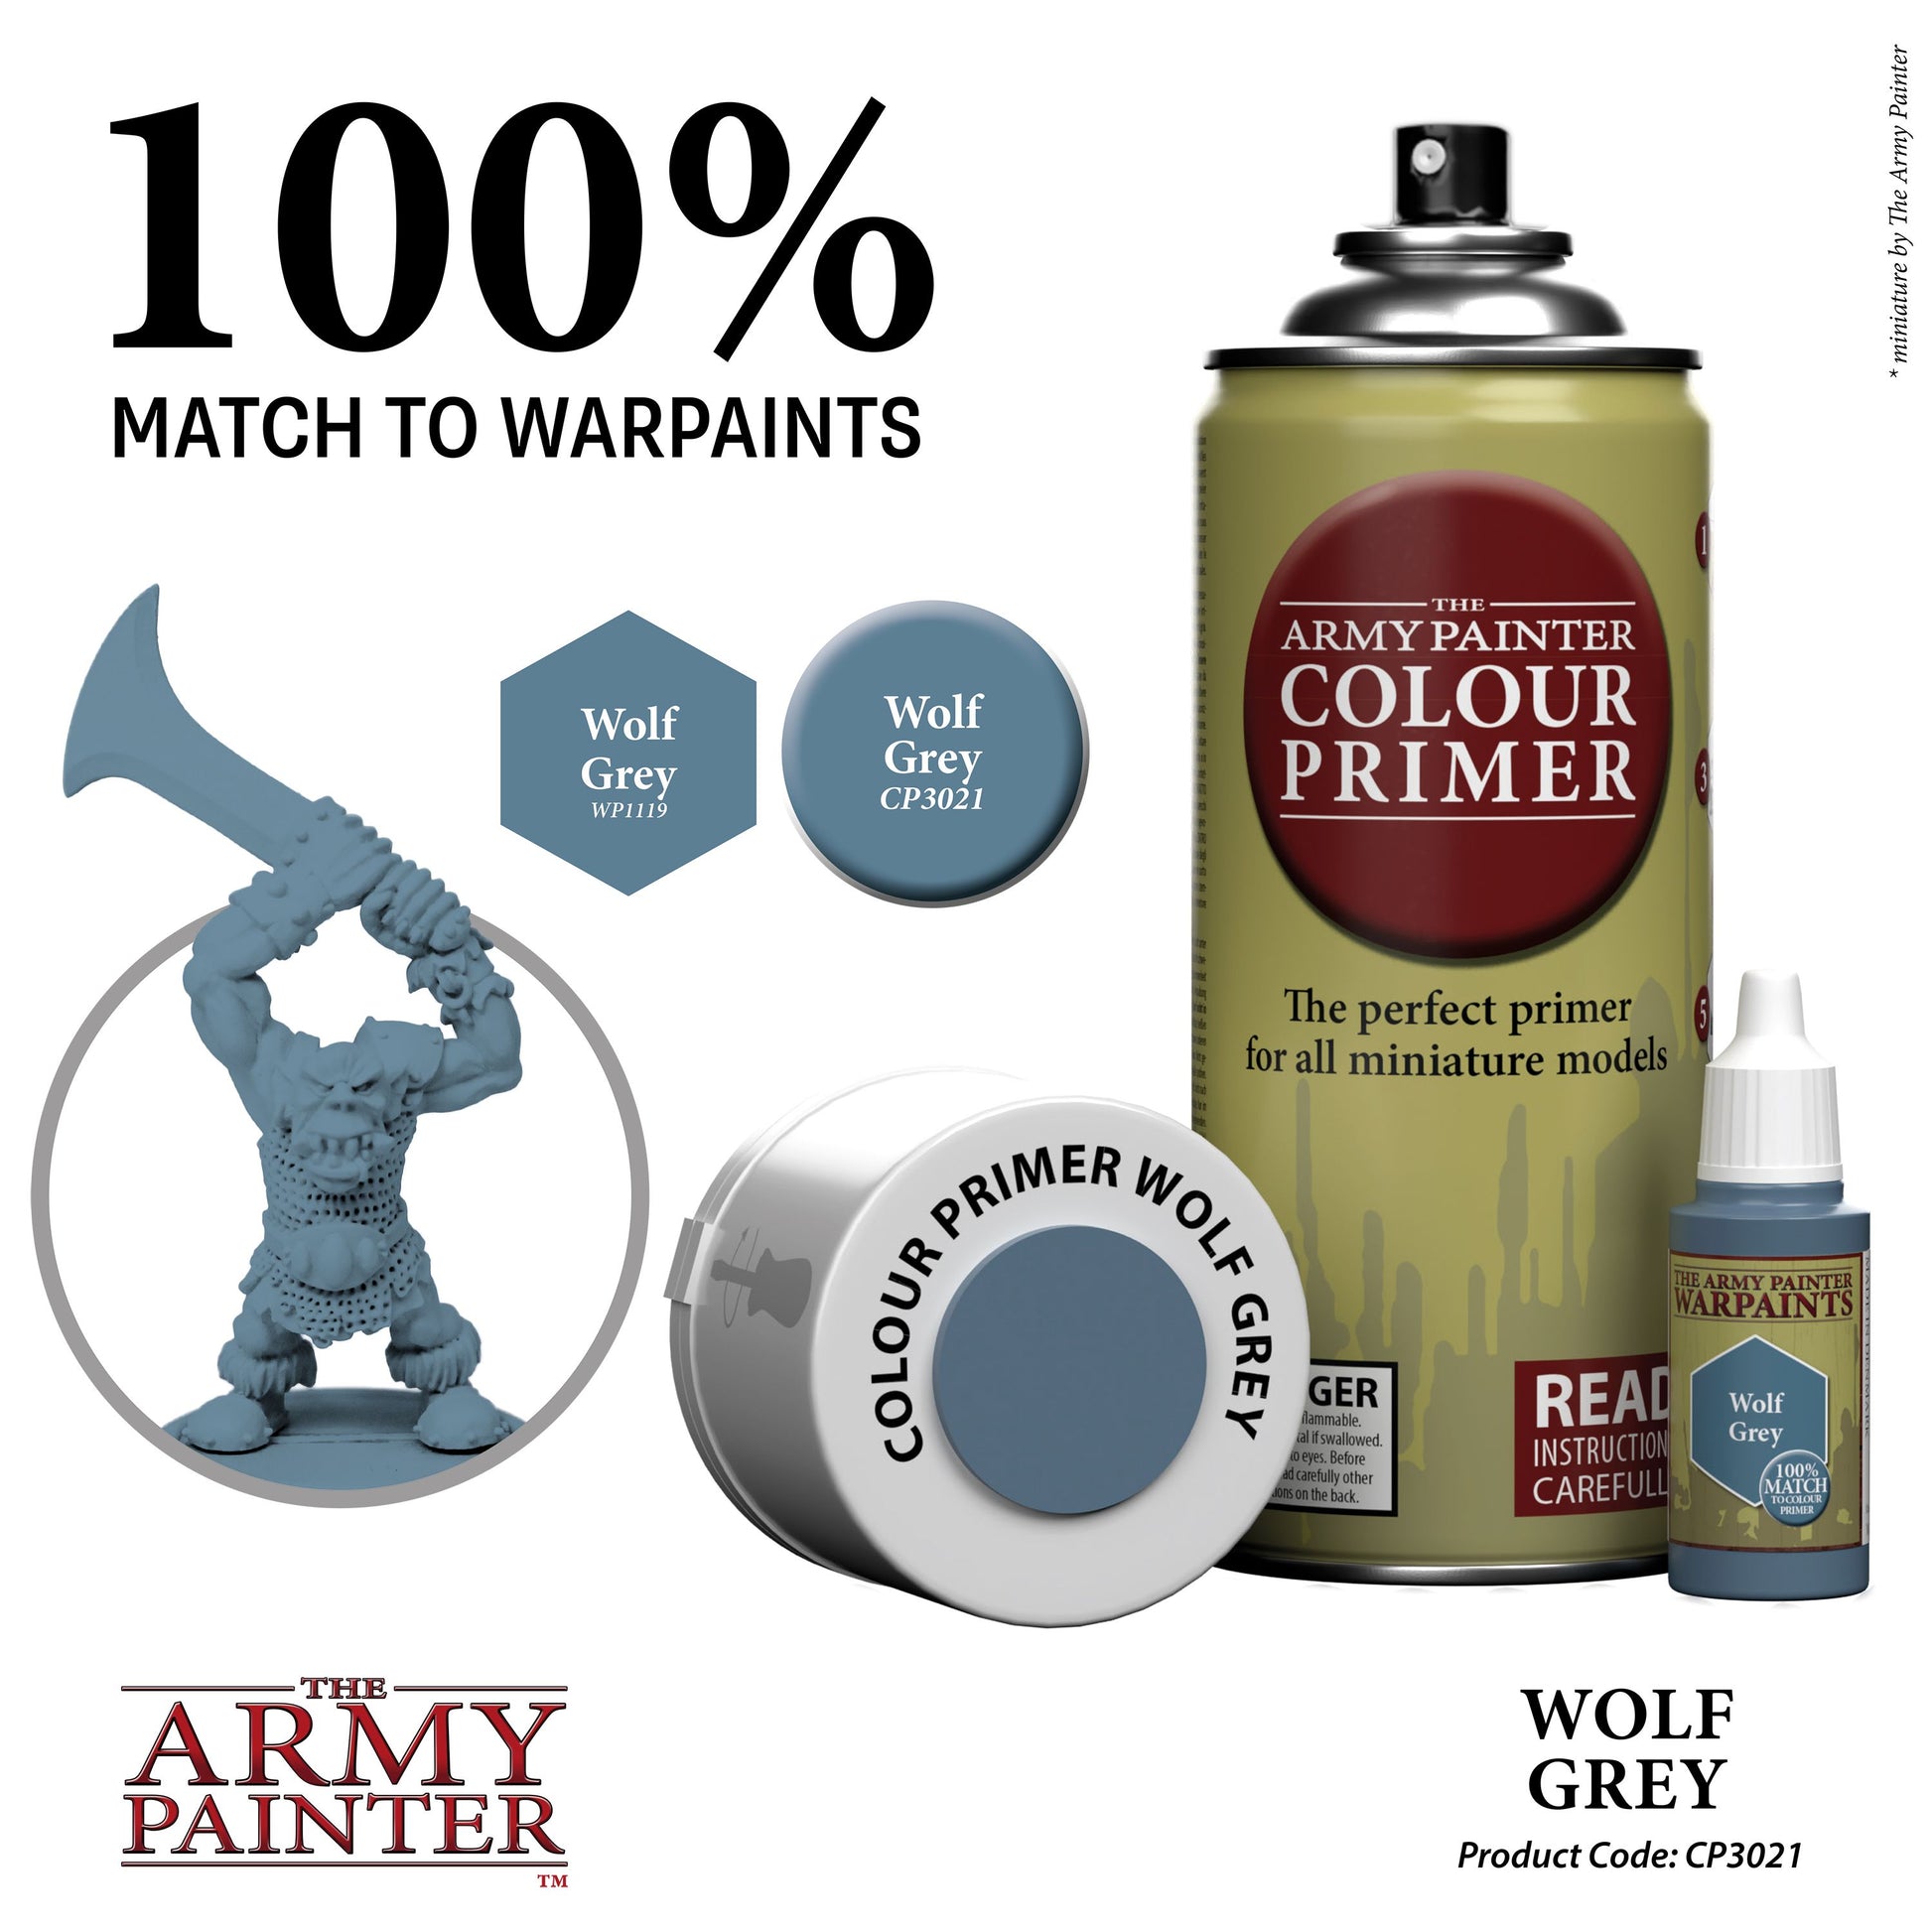 The Army Painter Color Primer Spray Paint, Uniform Grey, 400ml, 13.5oz -  Acrylic Spray Undercoat for Miniature Painting - Spray Primer for Plastic